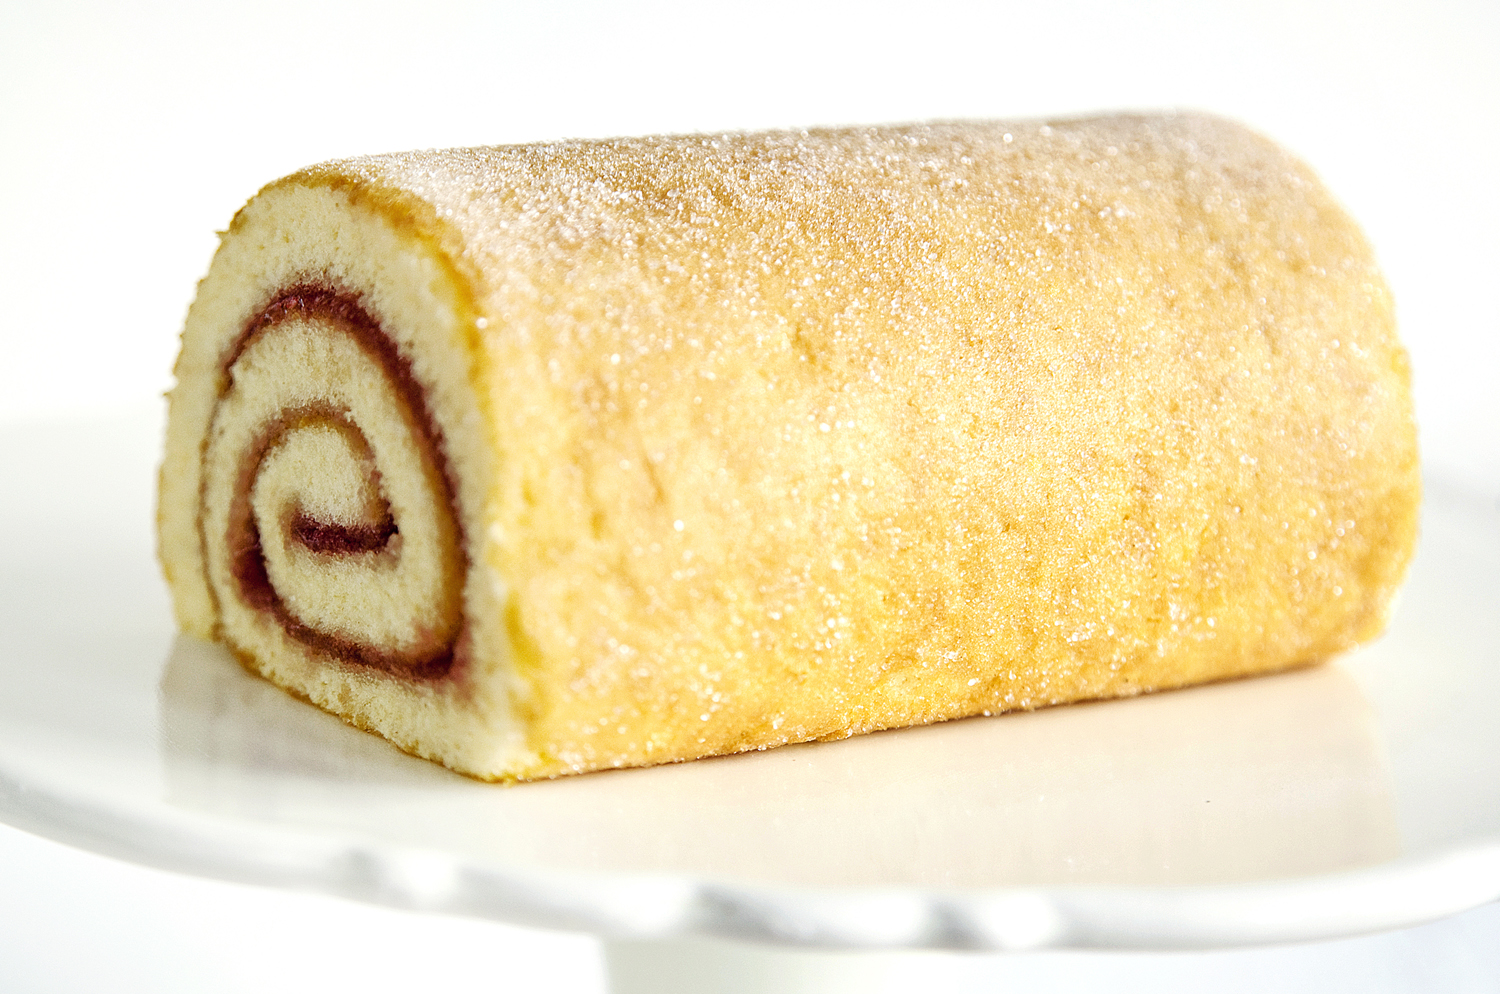 Cake Roll with Cream Creese and Strawberry Jam Filling